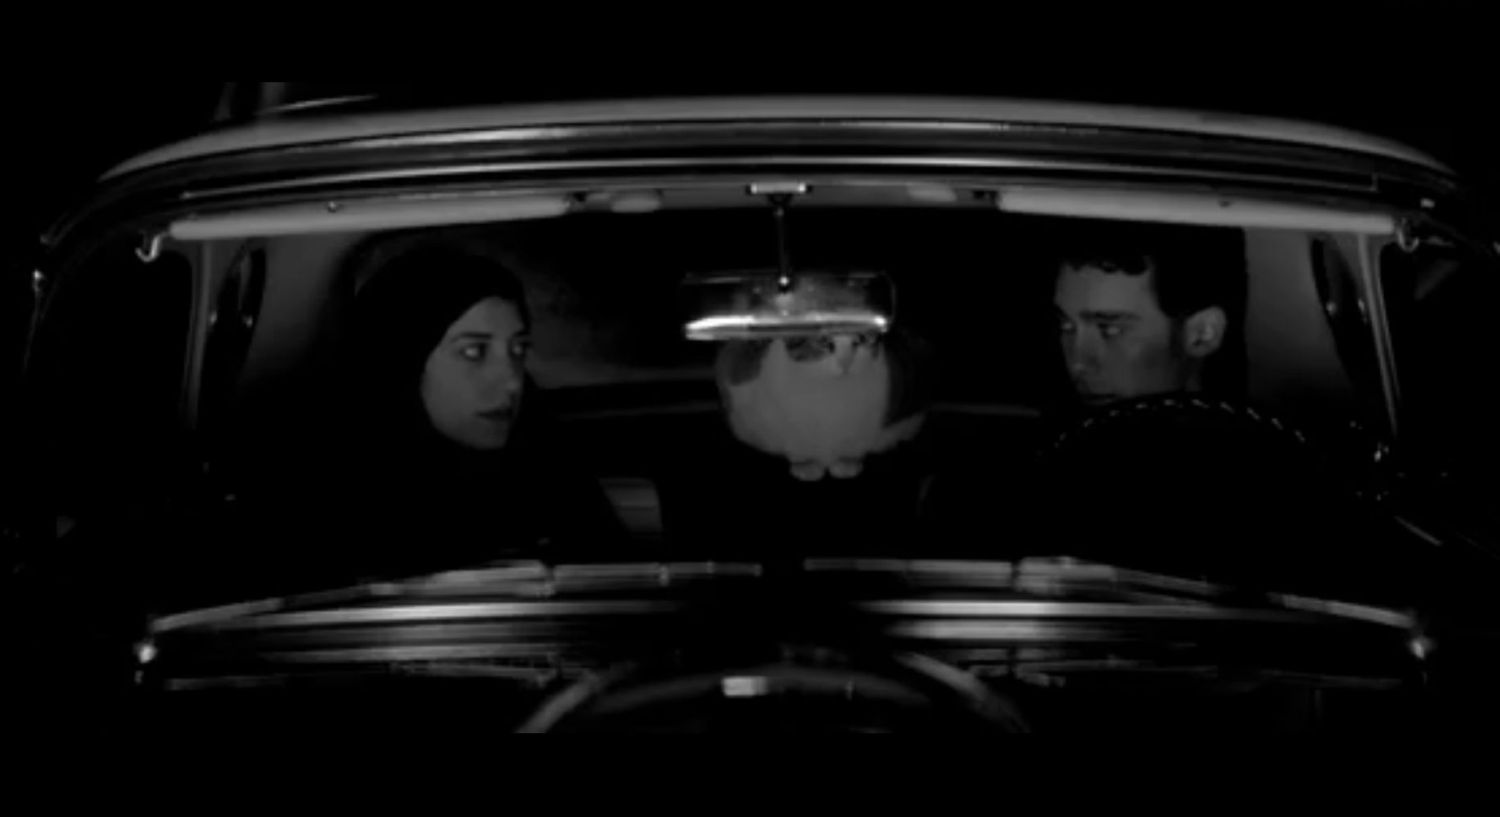 A Girl Walks Home Alone At Night #2